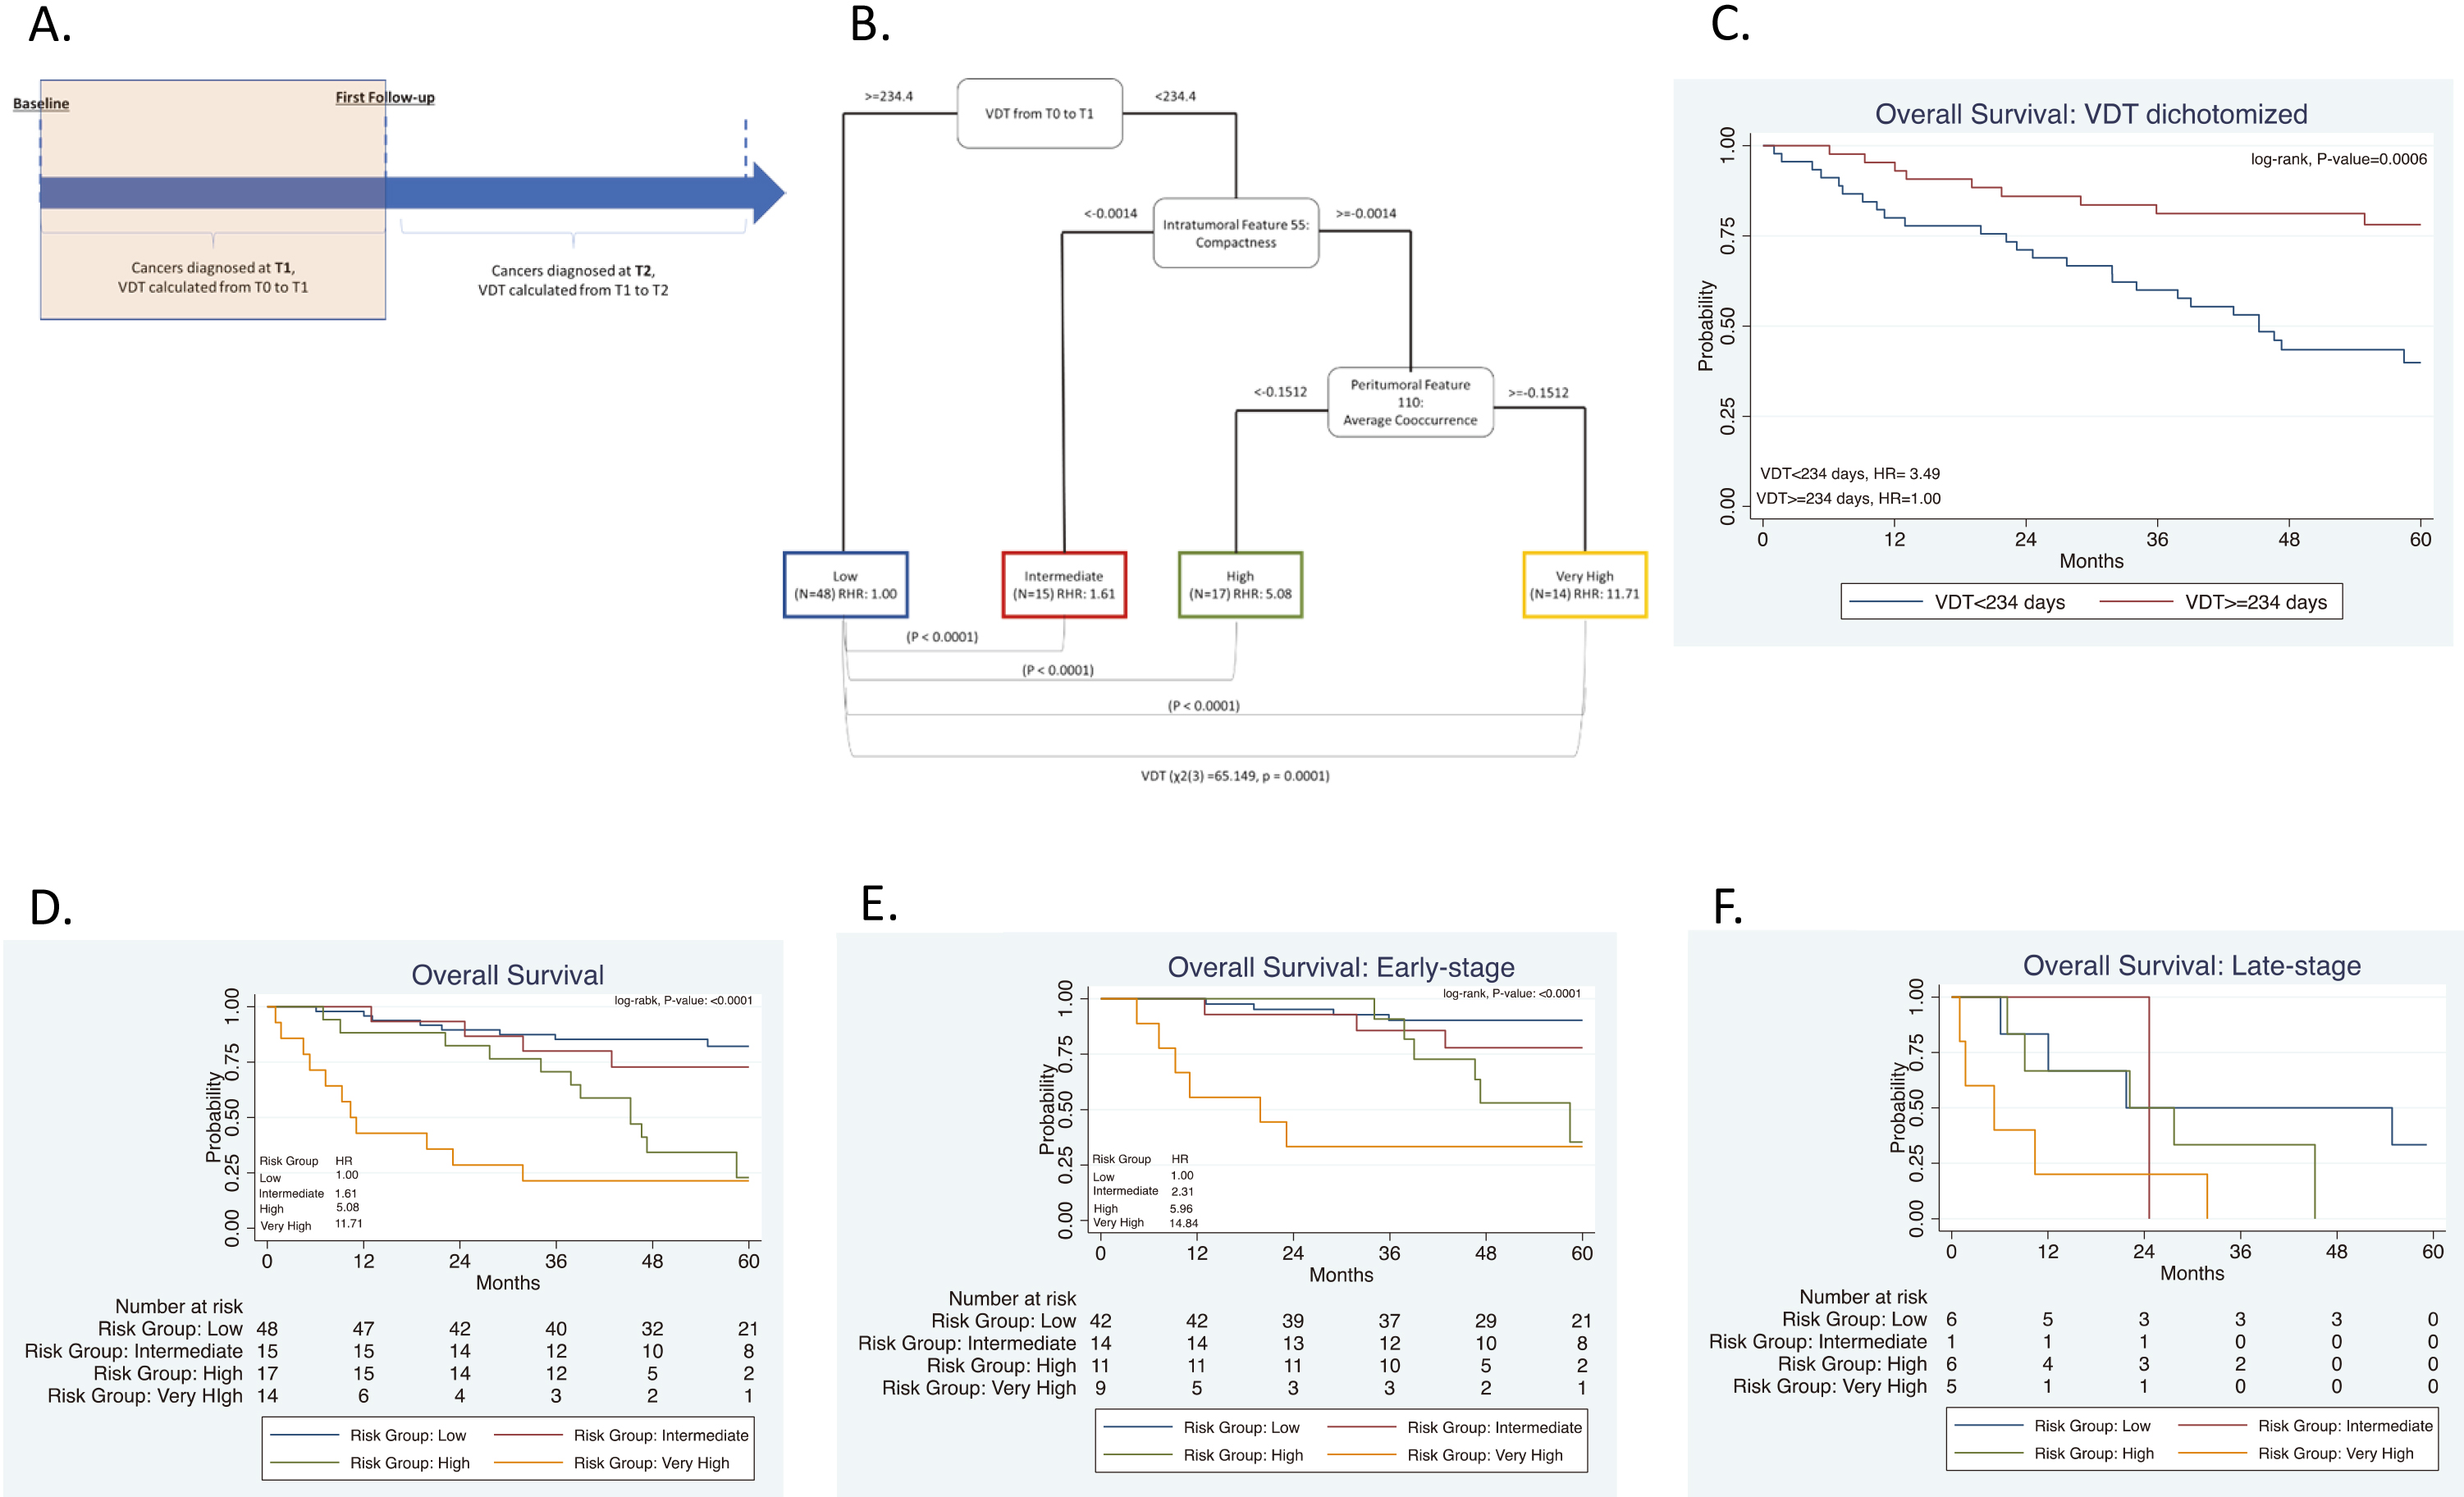 Risk-groups associated with overall survival for all patients and among early-stage patients diagnosed in the screening interval T0 to T1. (A) Schema identifying patients diagnosed in the screening interval T0 to T1. (B) The tree structure from the classification and regression tree (CART) analysis identified four risk groups based on two radiomics features and VDT. VDT was statistically significant different between very-high, high, and intermediate when compared to low-risk group. (C) Overall survival for VDT dichotomized by 234 days. Overall survival for the risk patient risk groups among all patients (D) and for early-stage (E), and for late-stage patients (F).